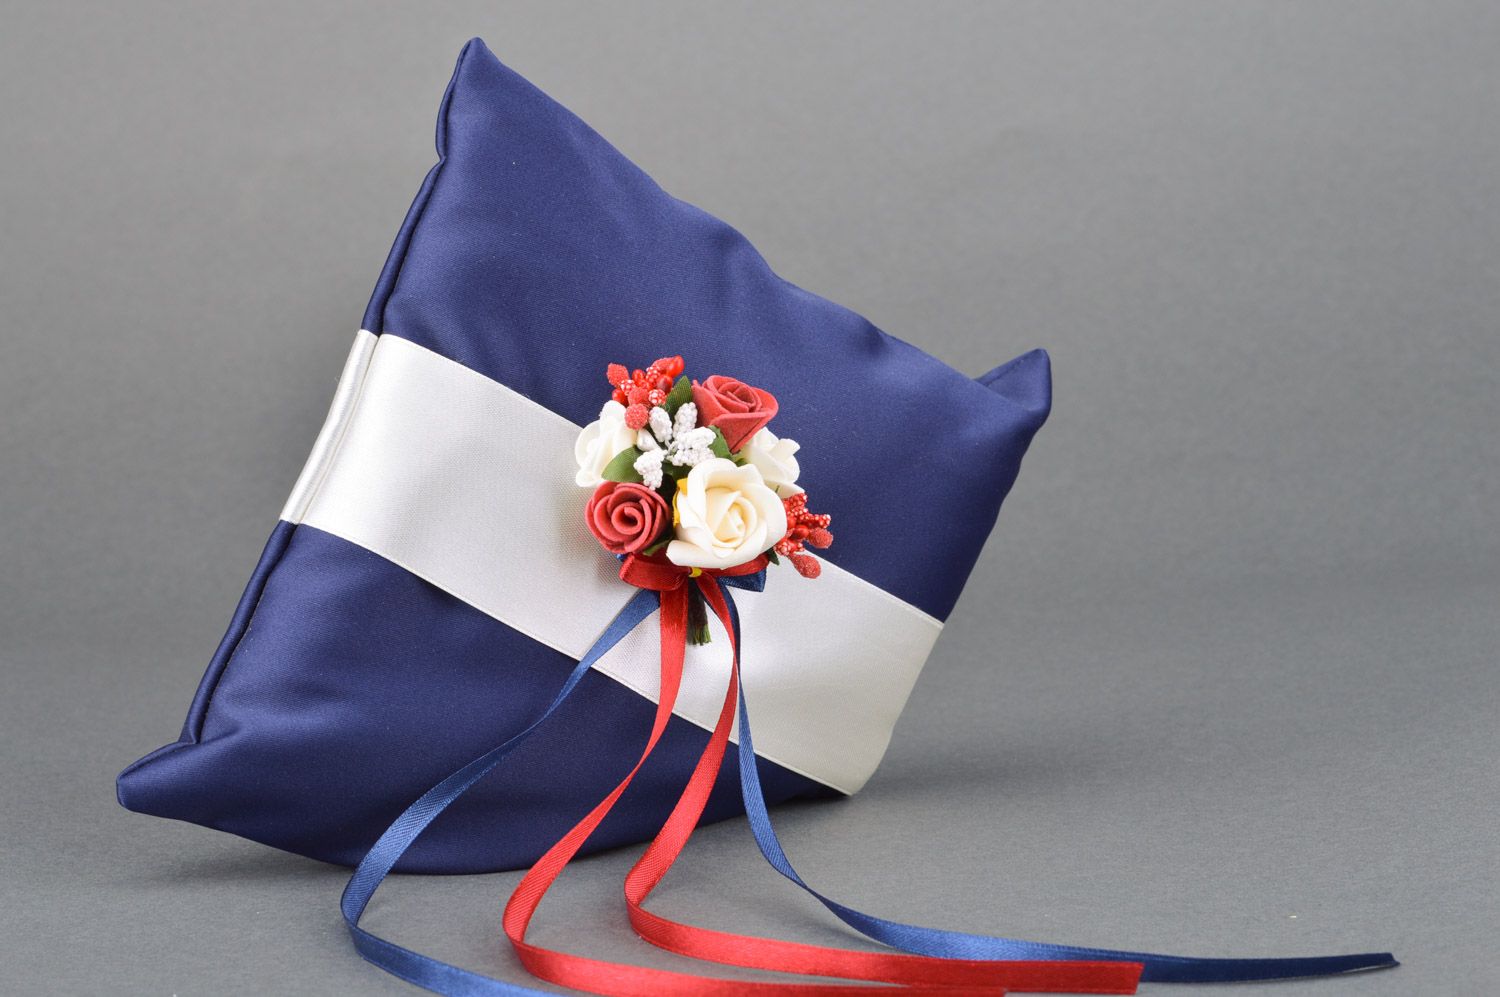 Handmade blue wedding ring pillow made of fabric with flowers and ribbons photo 5